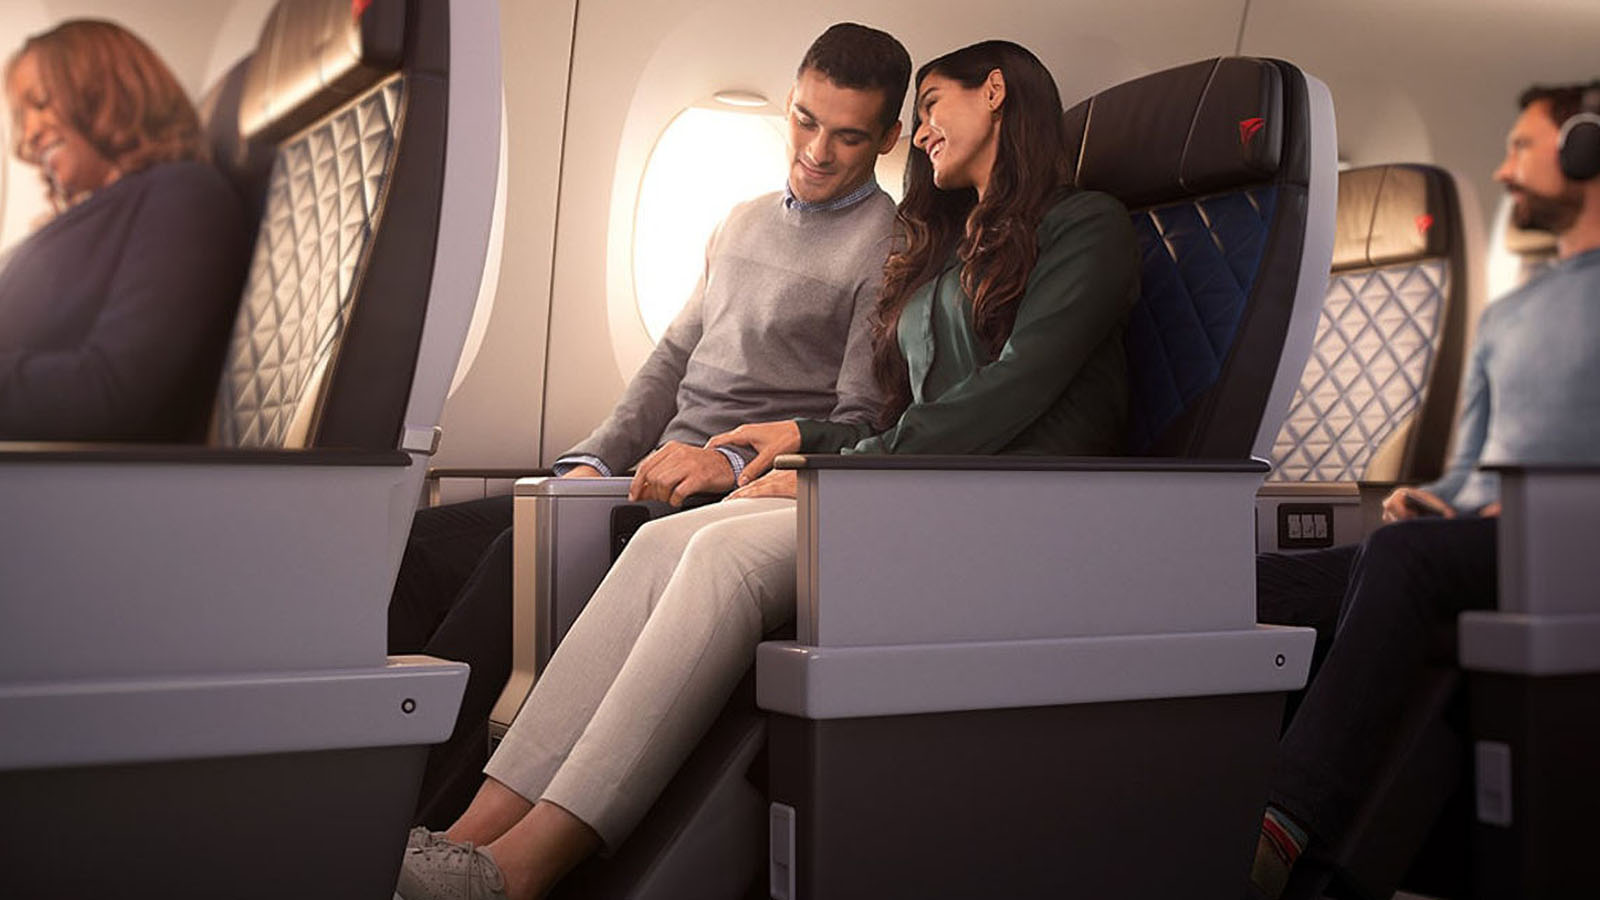 A couple relax in the Delta Premium Select cabin. Get a status match and fly Delta.